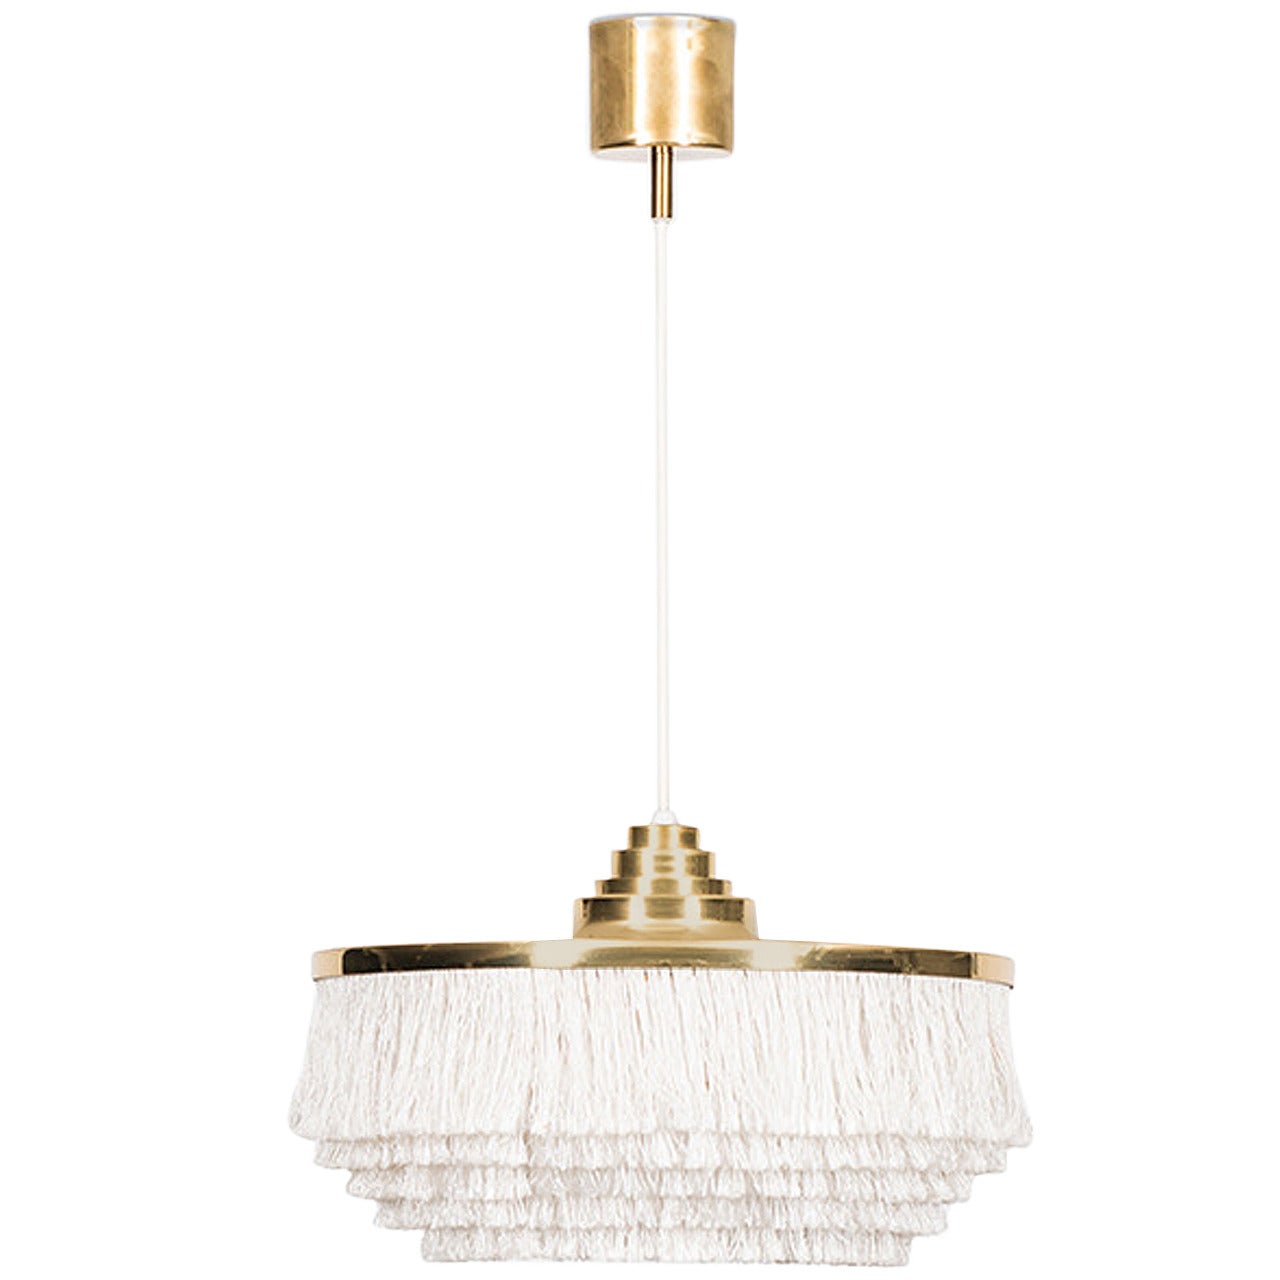 Hans-Agne Jakobsson Ceiling Lamp in Brass and White Fabric